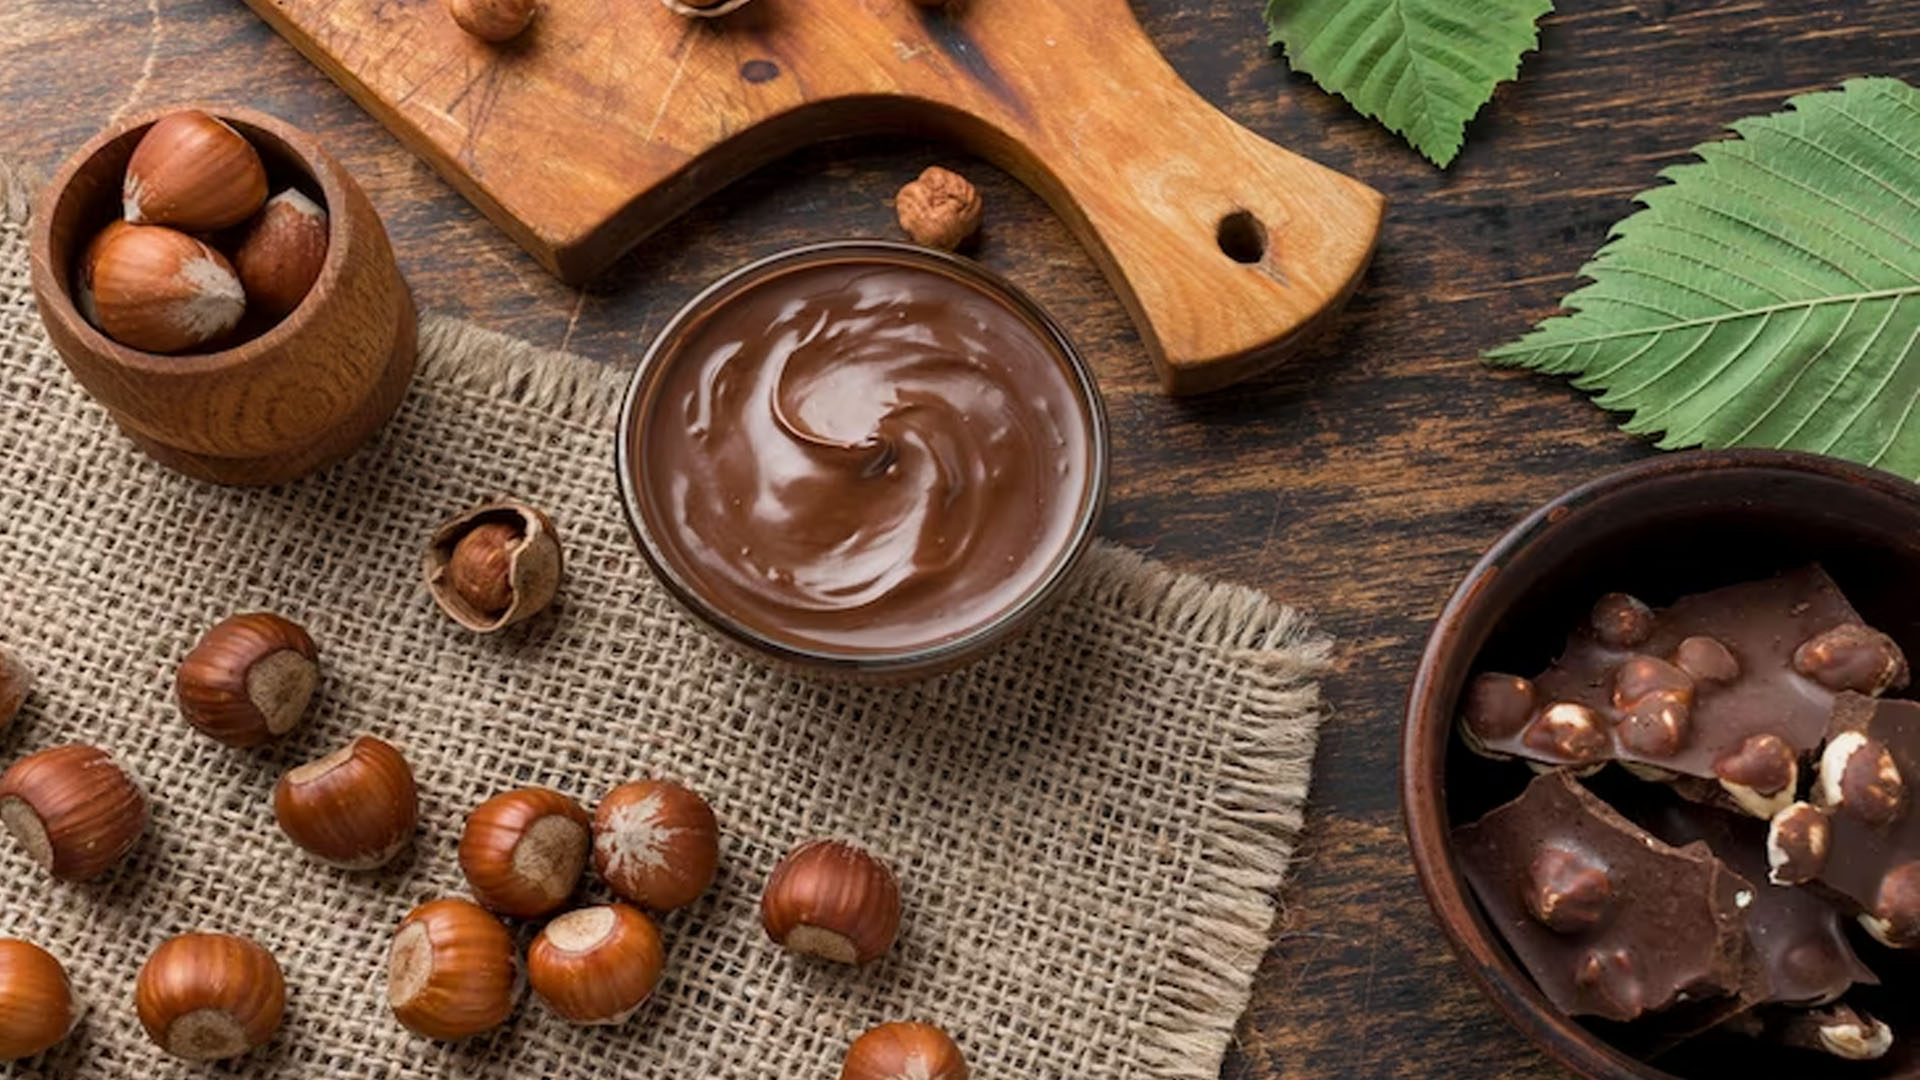 Does Nutella Have Health Benefits?